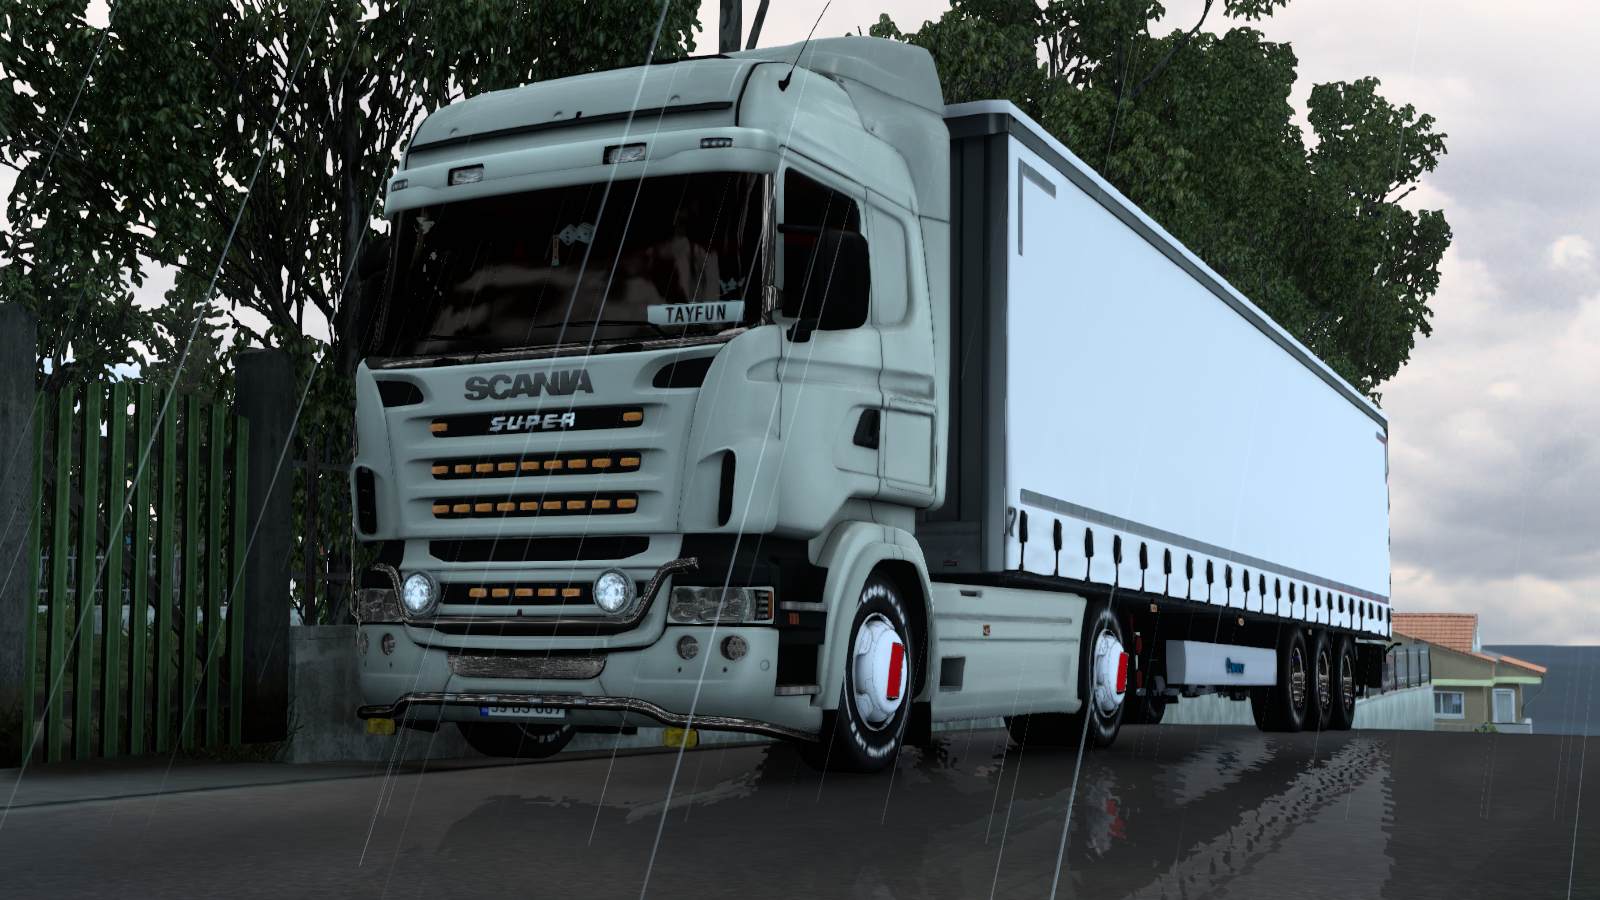 ets2_20210709_153958_00.png